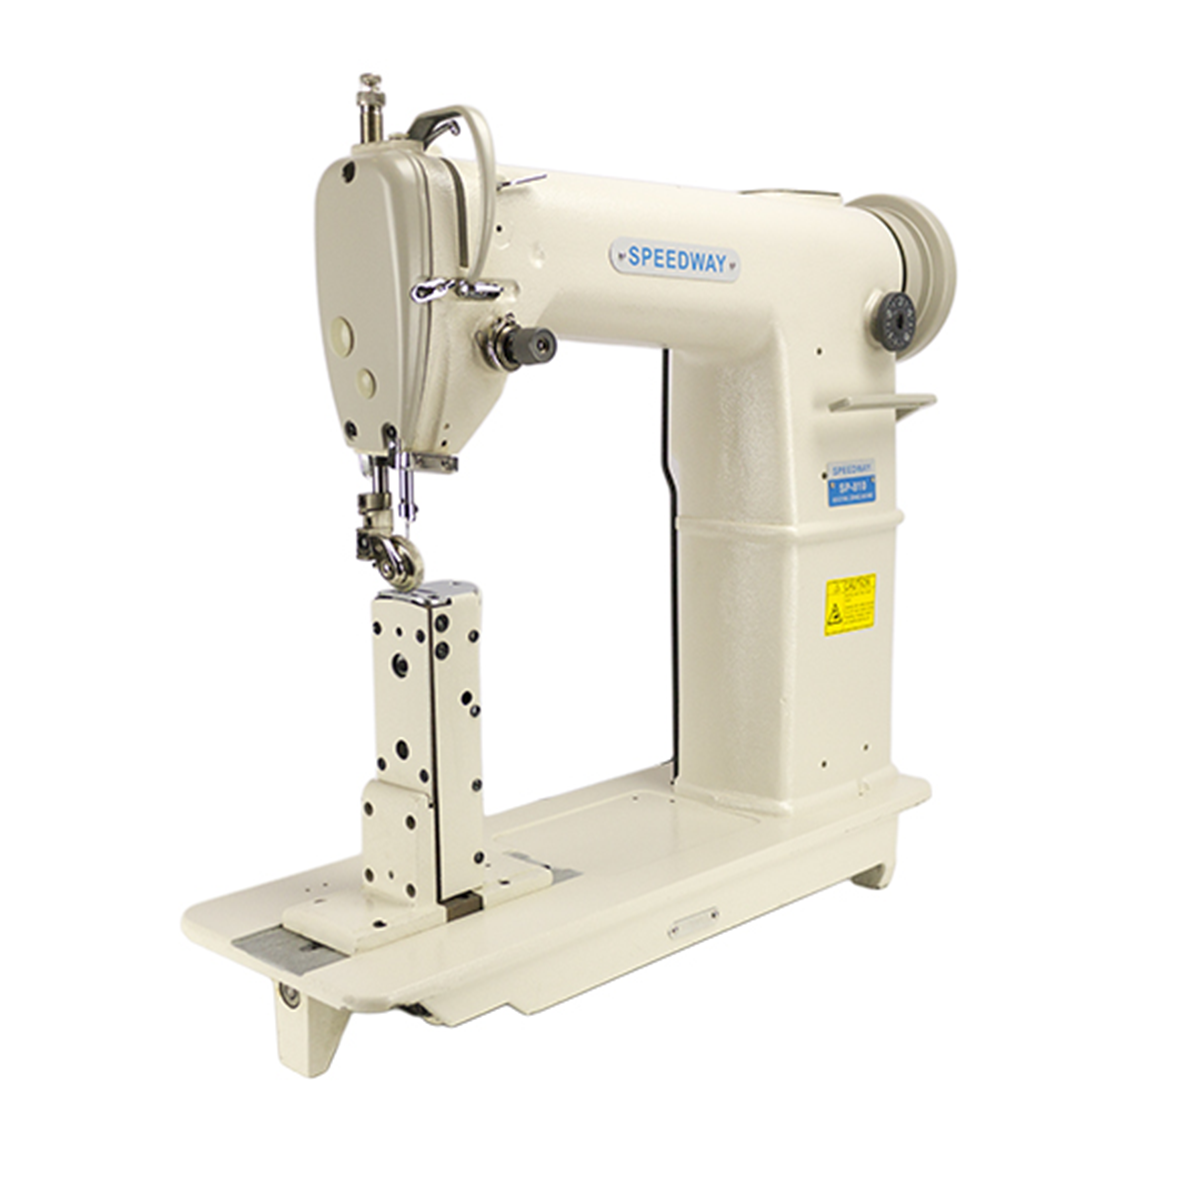 SPEEDWAY SW-810 Single Needle Post-bed Lockstitch Industrial Sewing Machine with Servo Motor, Table and Stand Included